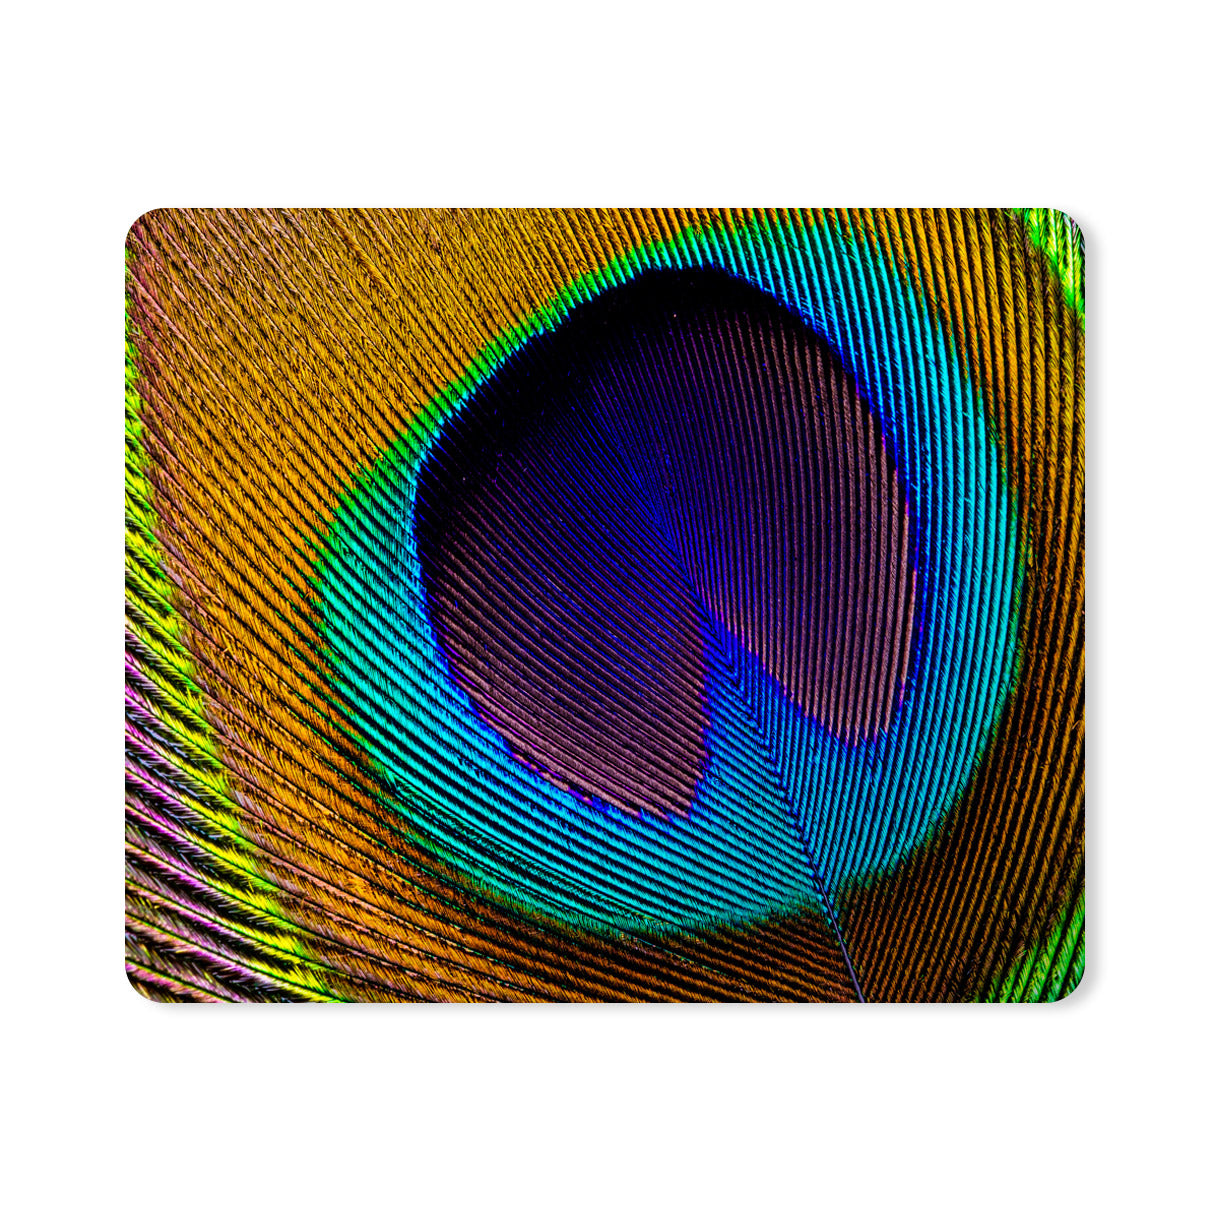 Peacock Feather Background Designer Printed Premium Mouse pad (9 in x 7.5 in)